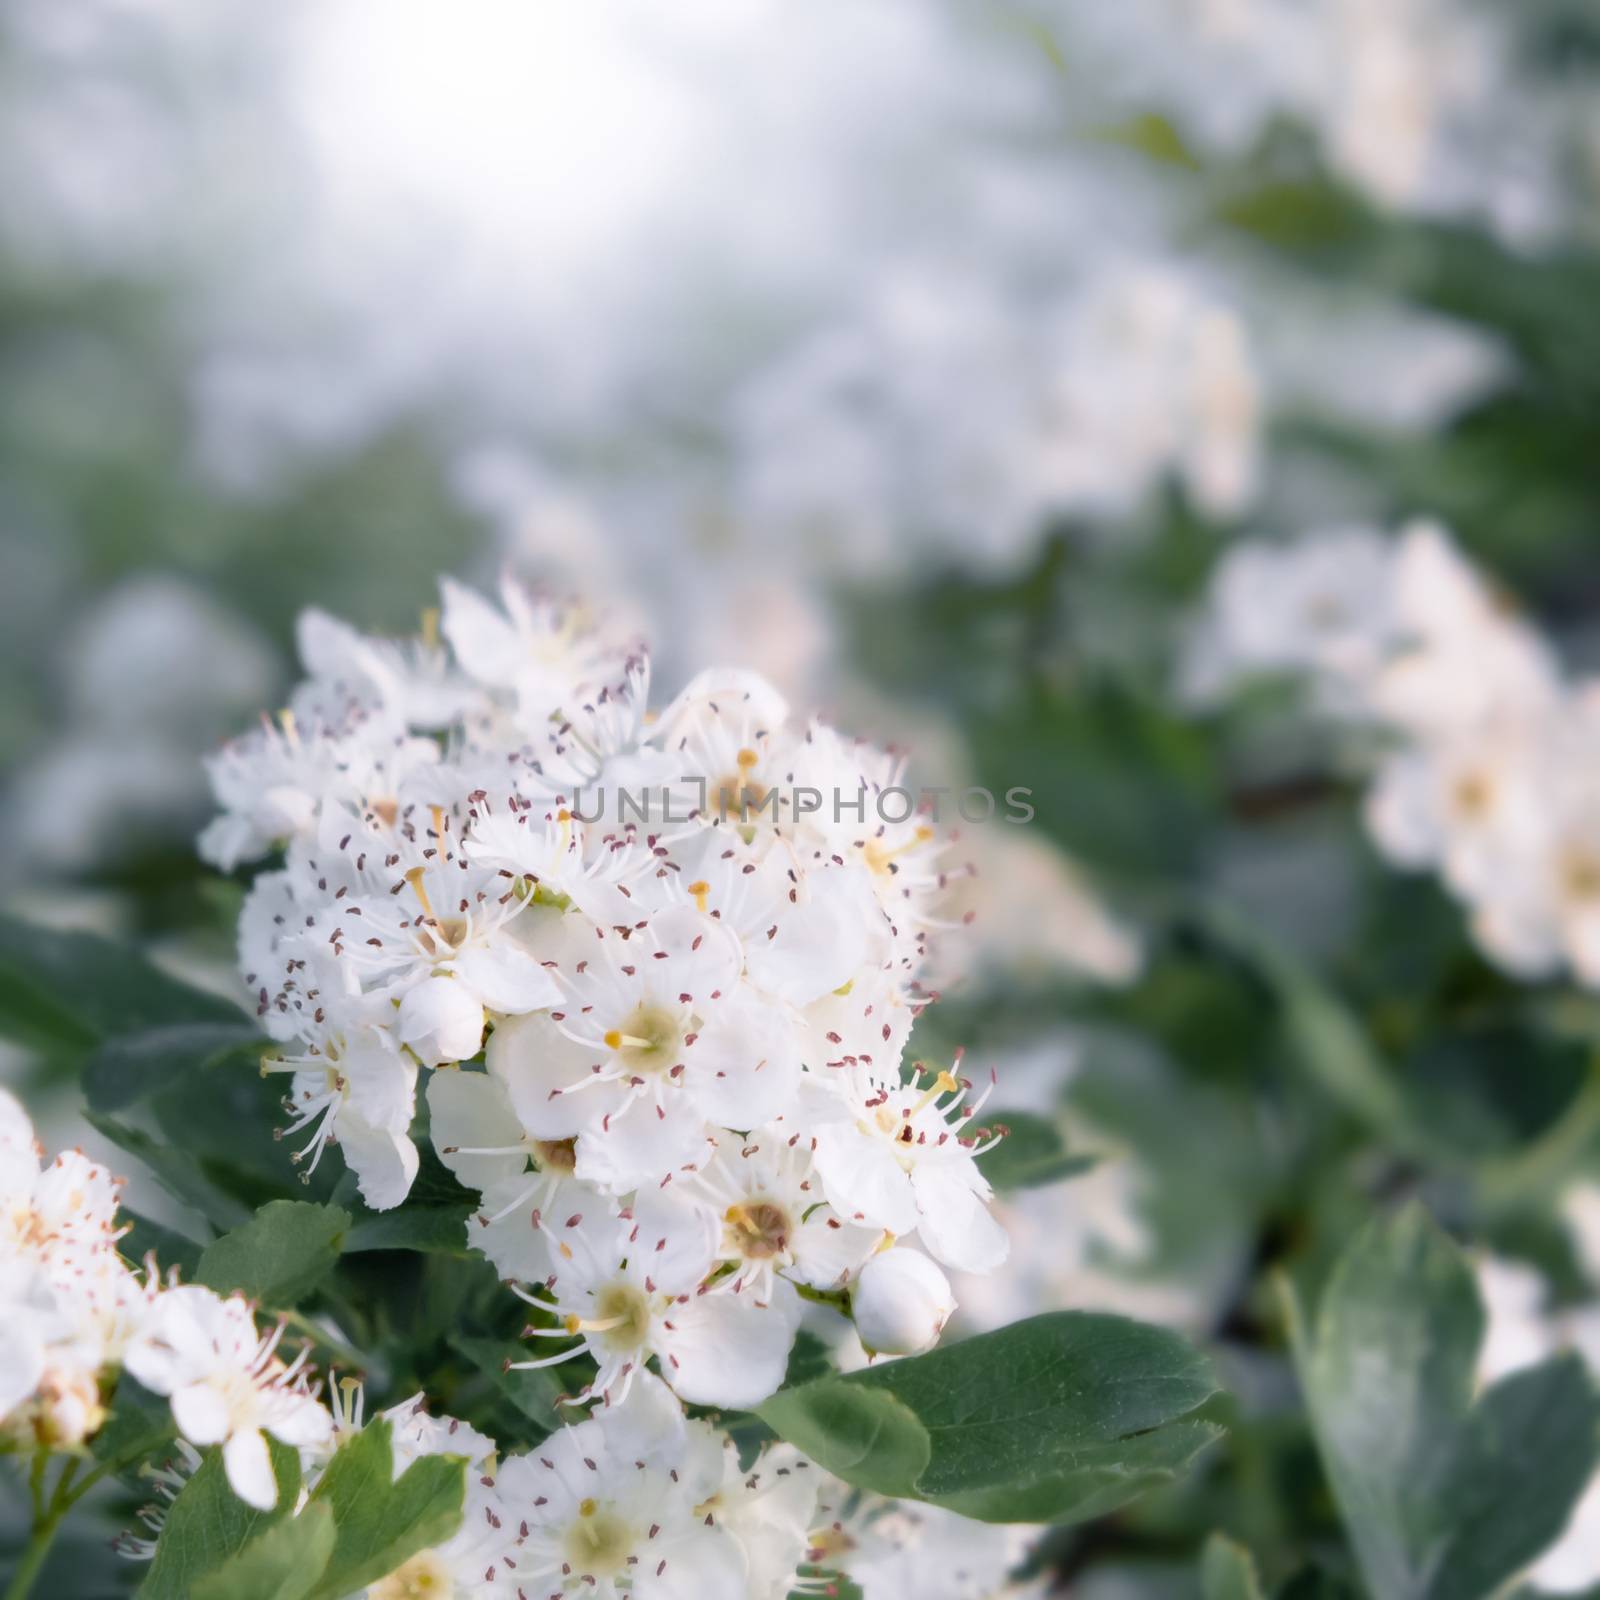 Delicate white flowers of hawthorn in the spring garden, close-up.